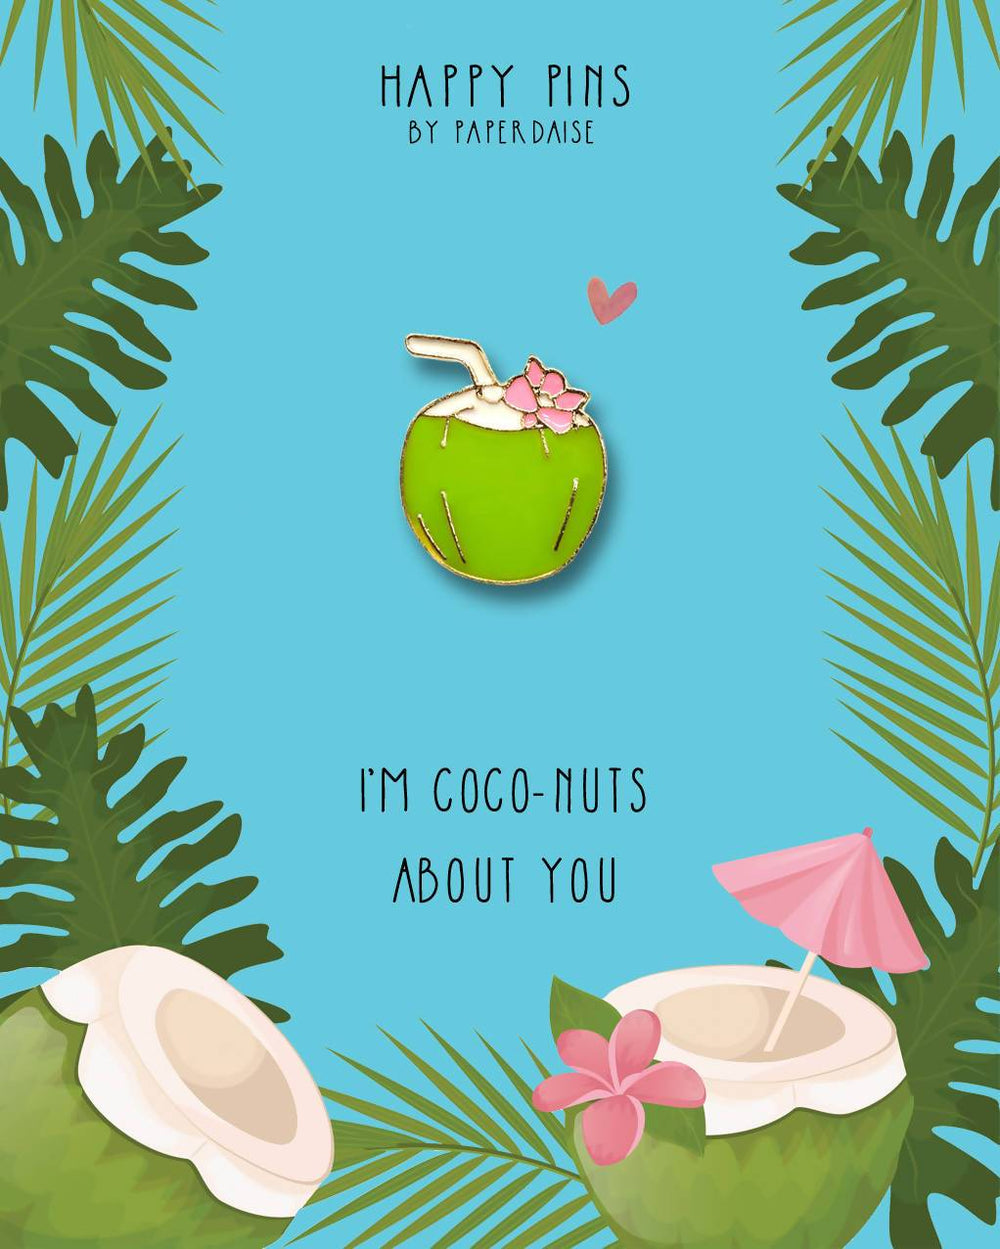 I'm Coconuts About You Enamel Pin Pins Paperdaise Accessories 